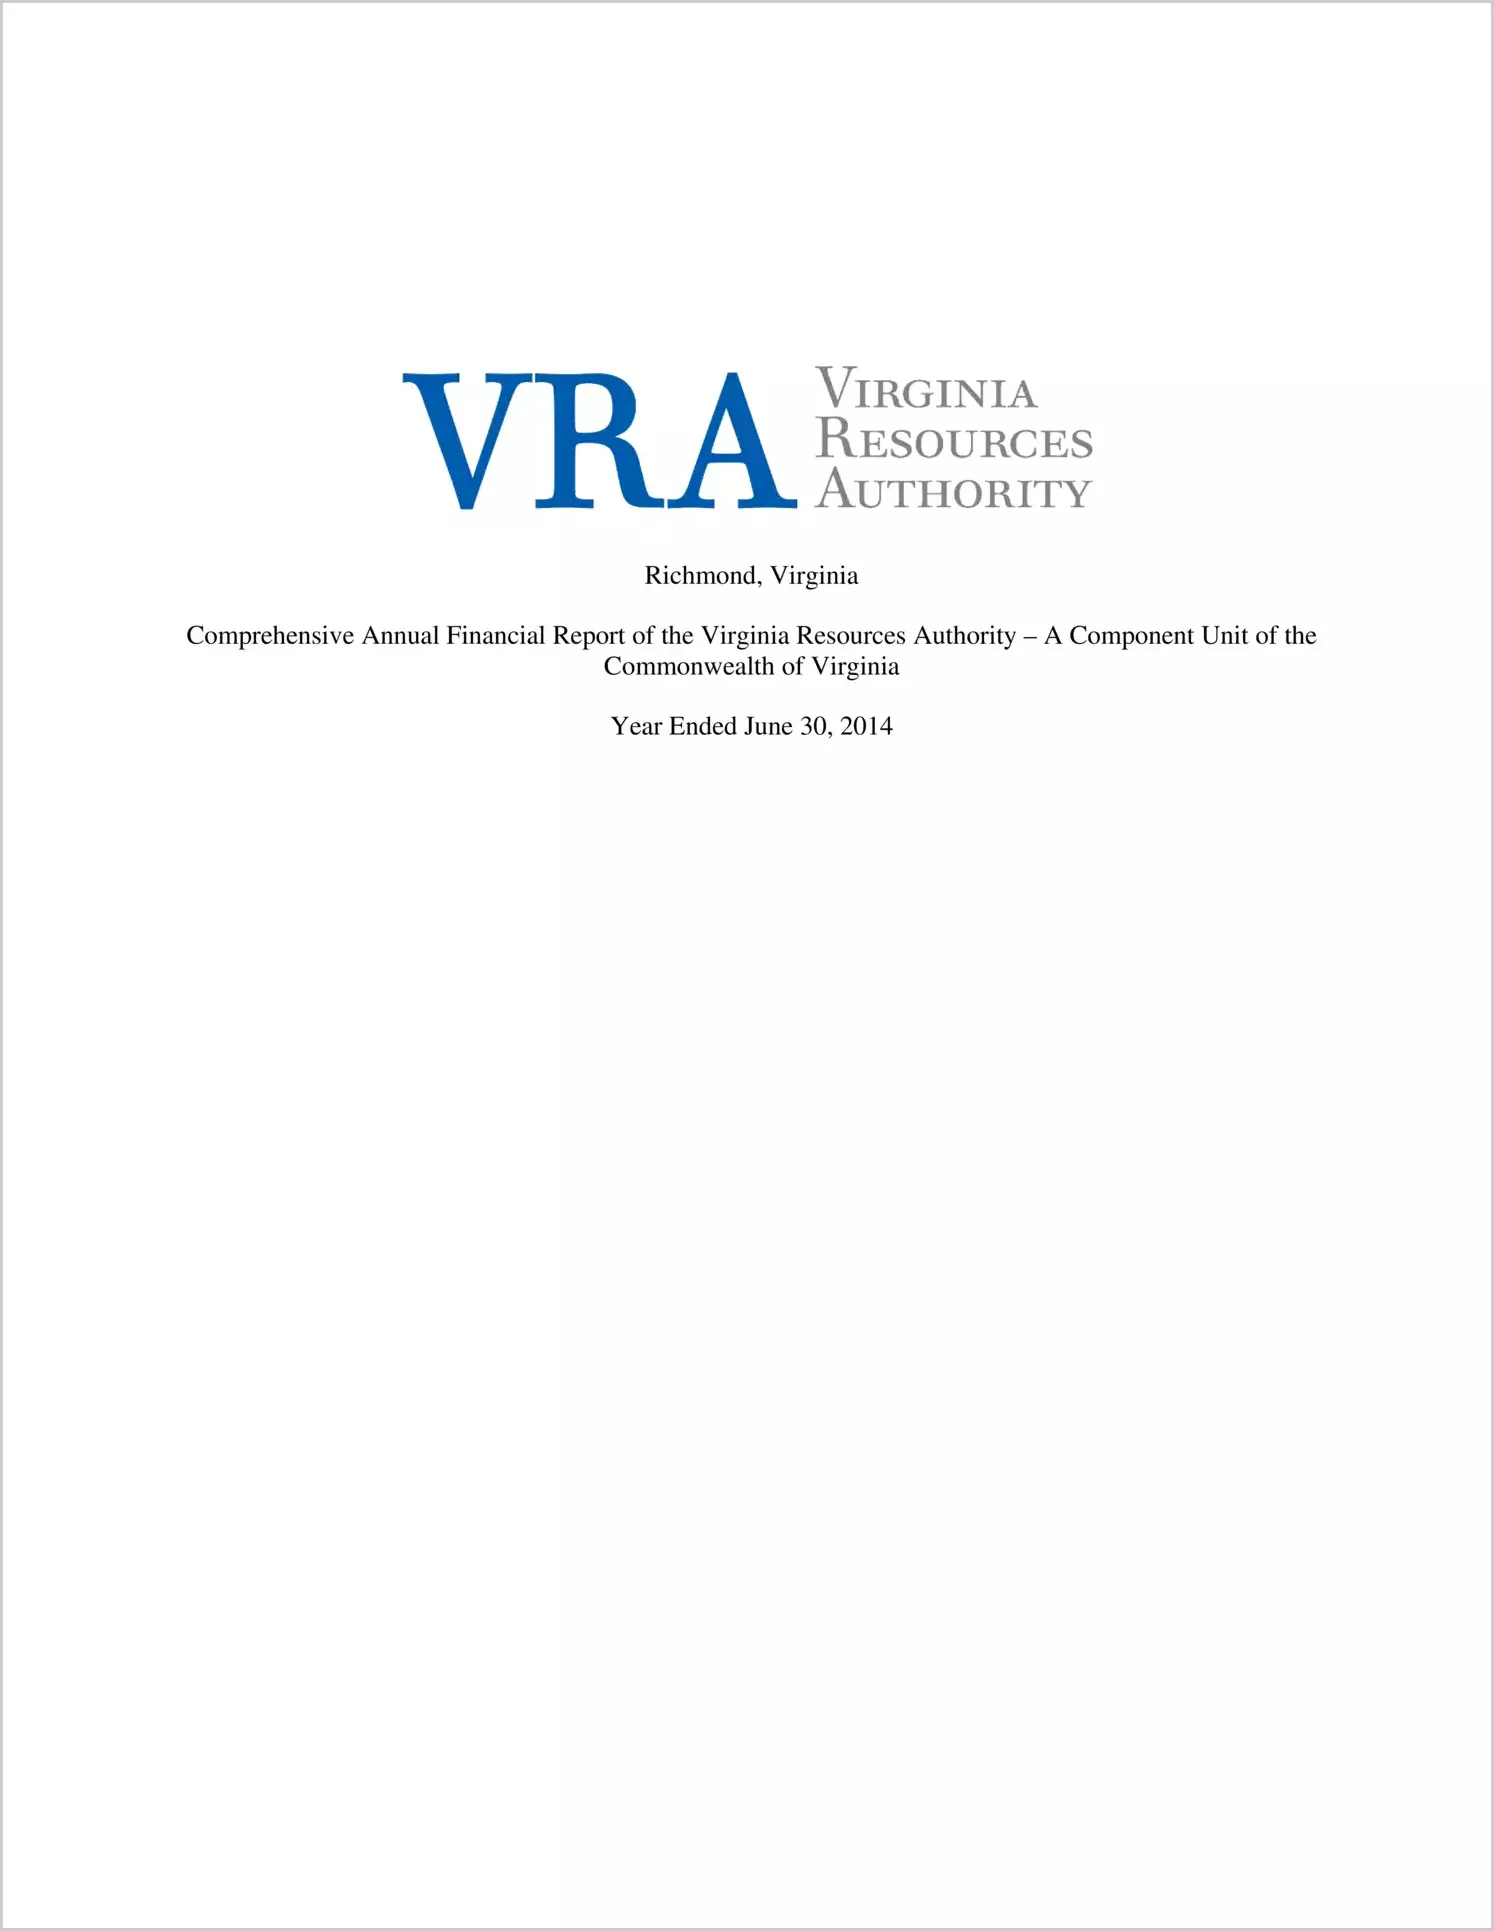 Virginia Resources Authority Financial Statement for the fiscal year ended June 30, 2014